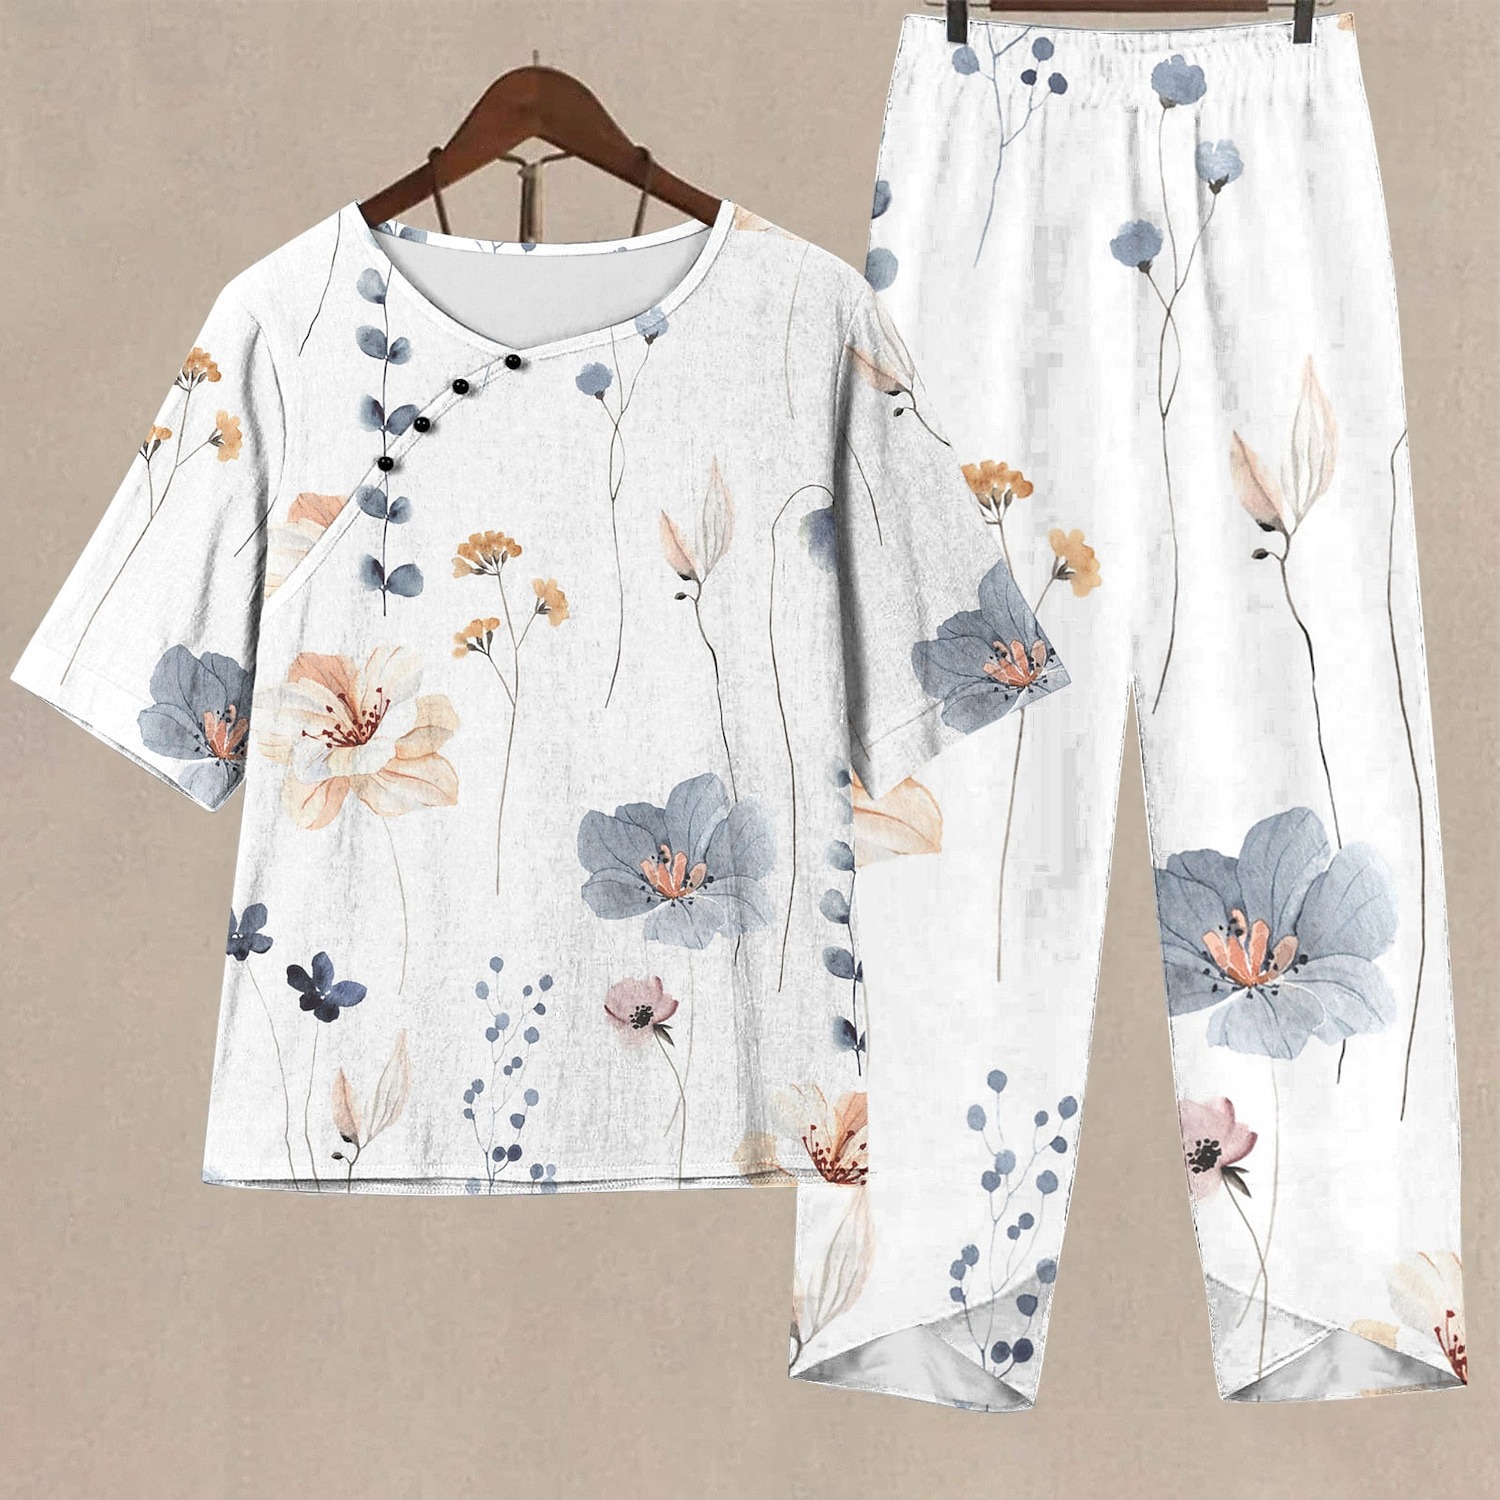 Women's Summer Casual Floral Print Round Neck Two Piece Suit